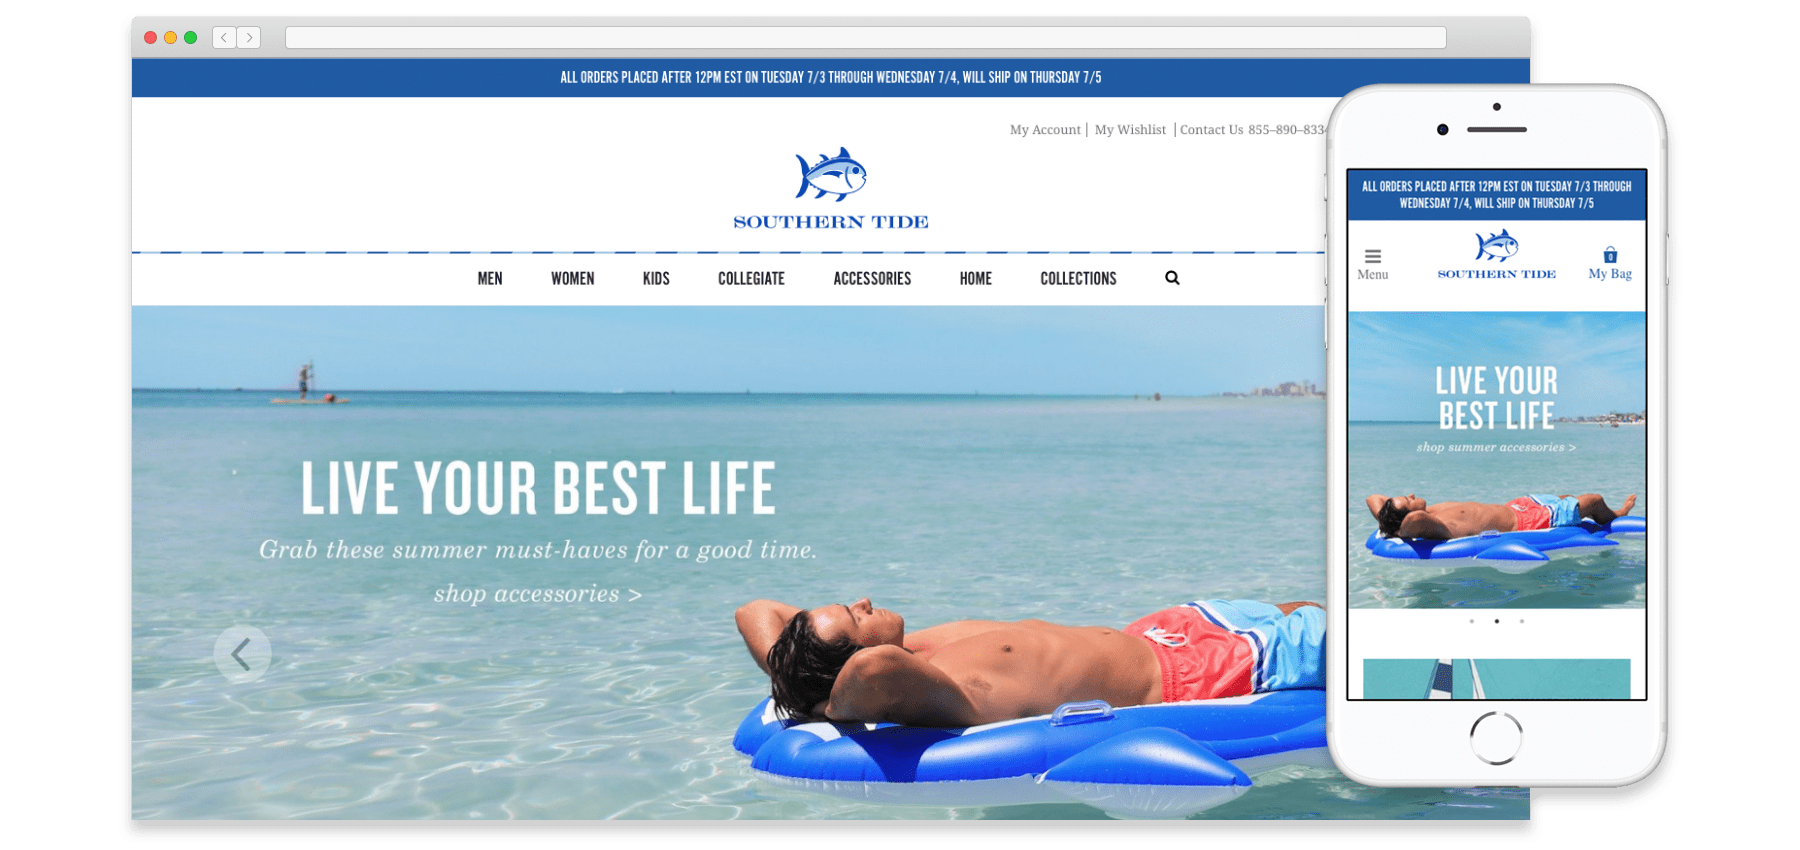 A mockup of the Southern Tide website on desktop and mobile sizes.